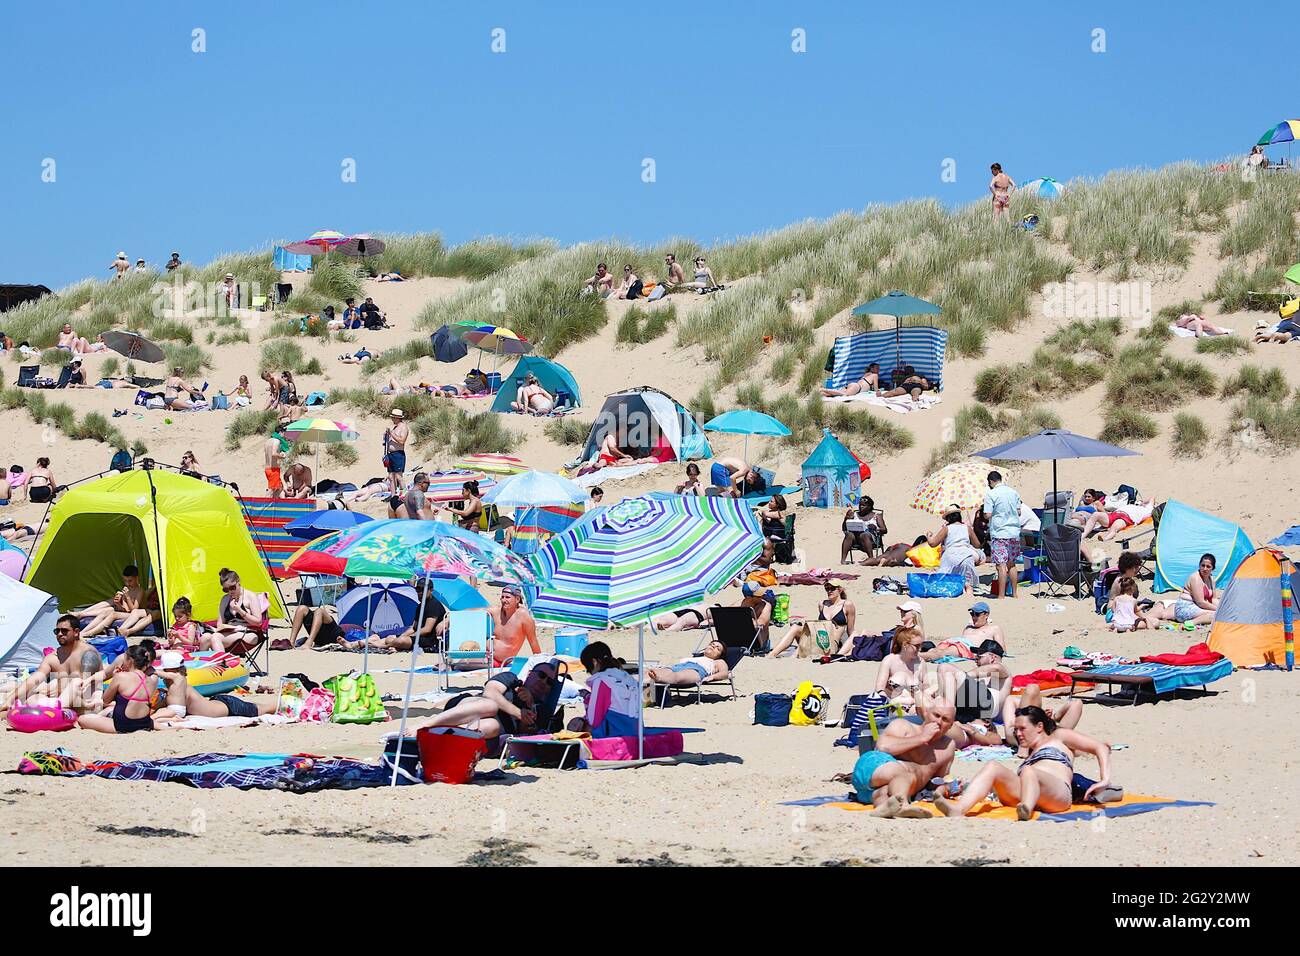 Camber, East Sussex, UK. 13 Jun, 2021. UK Weather: Large numbers of people are expected to make there way down to the golden sandy beaches of Camber in East Sussex this weekend as the weather gets hotter and hotter. England kick off their debut Euro 2020 match today as people make there way to the beach. Photo Credit: Paul Lawrenson /Alamy Live News Stock Photo